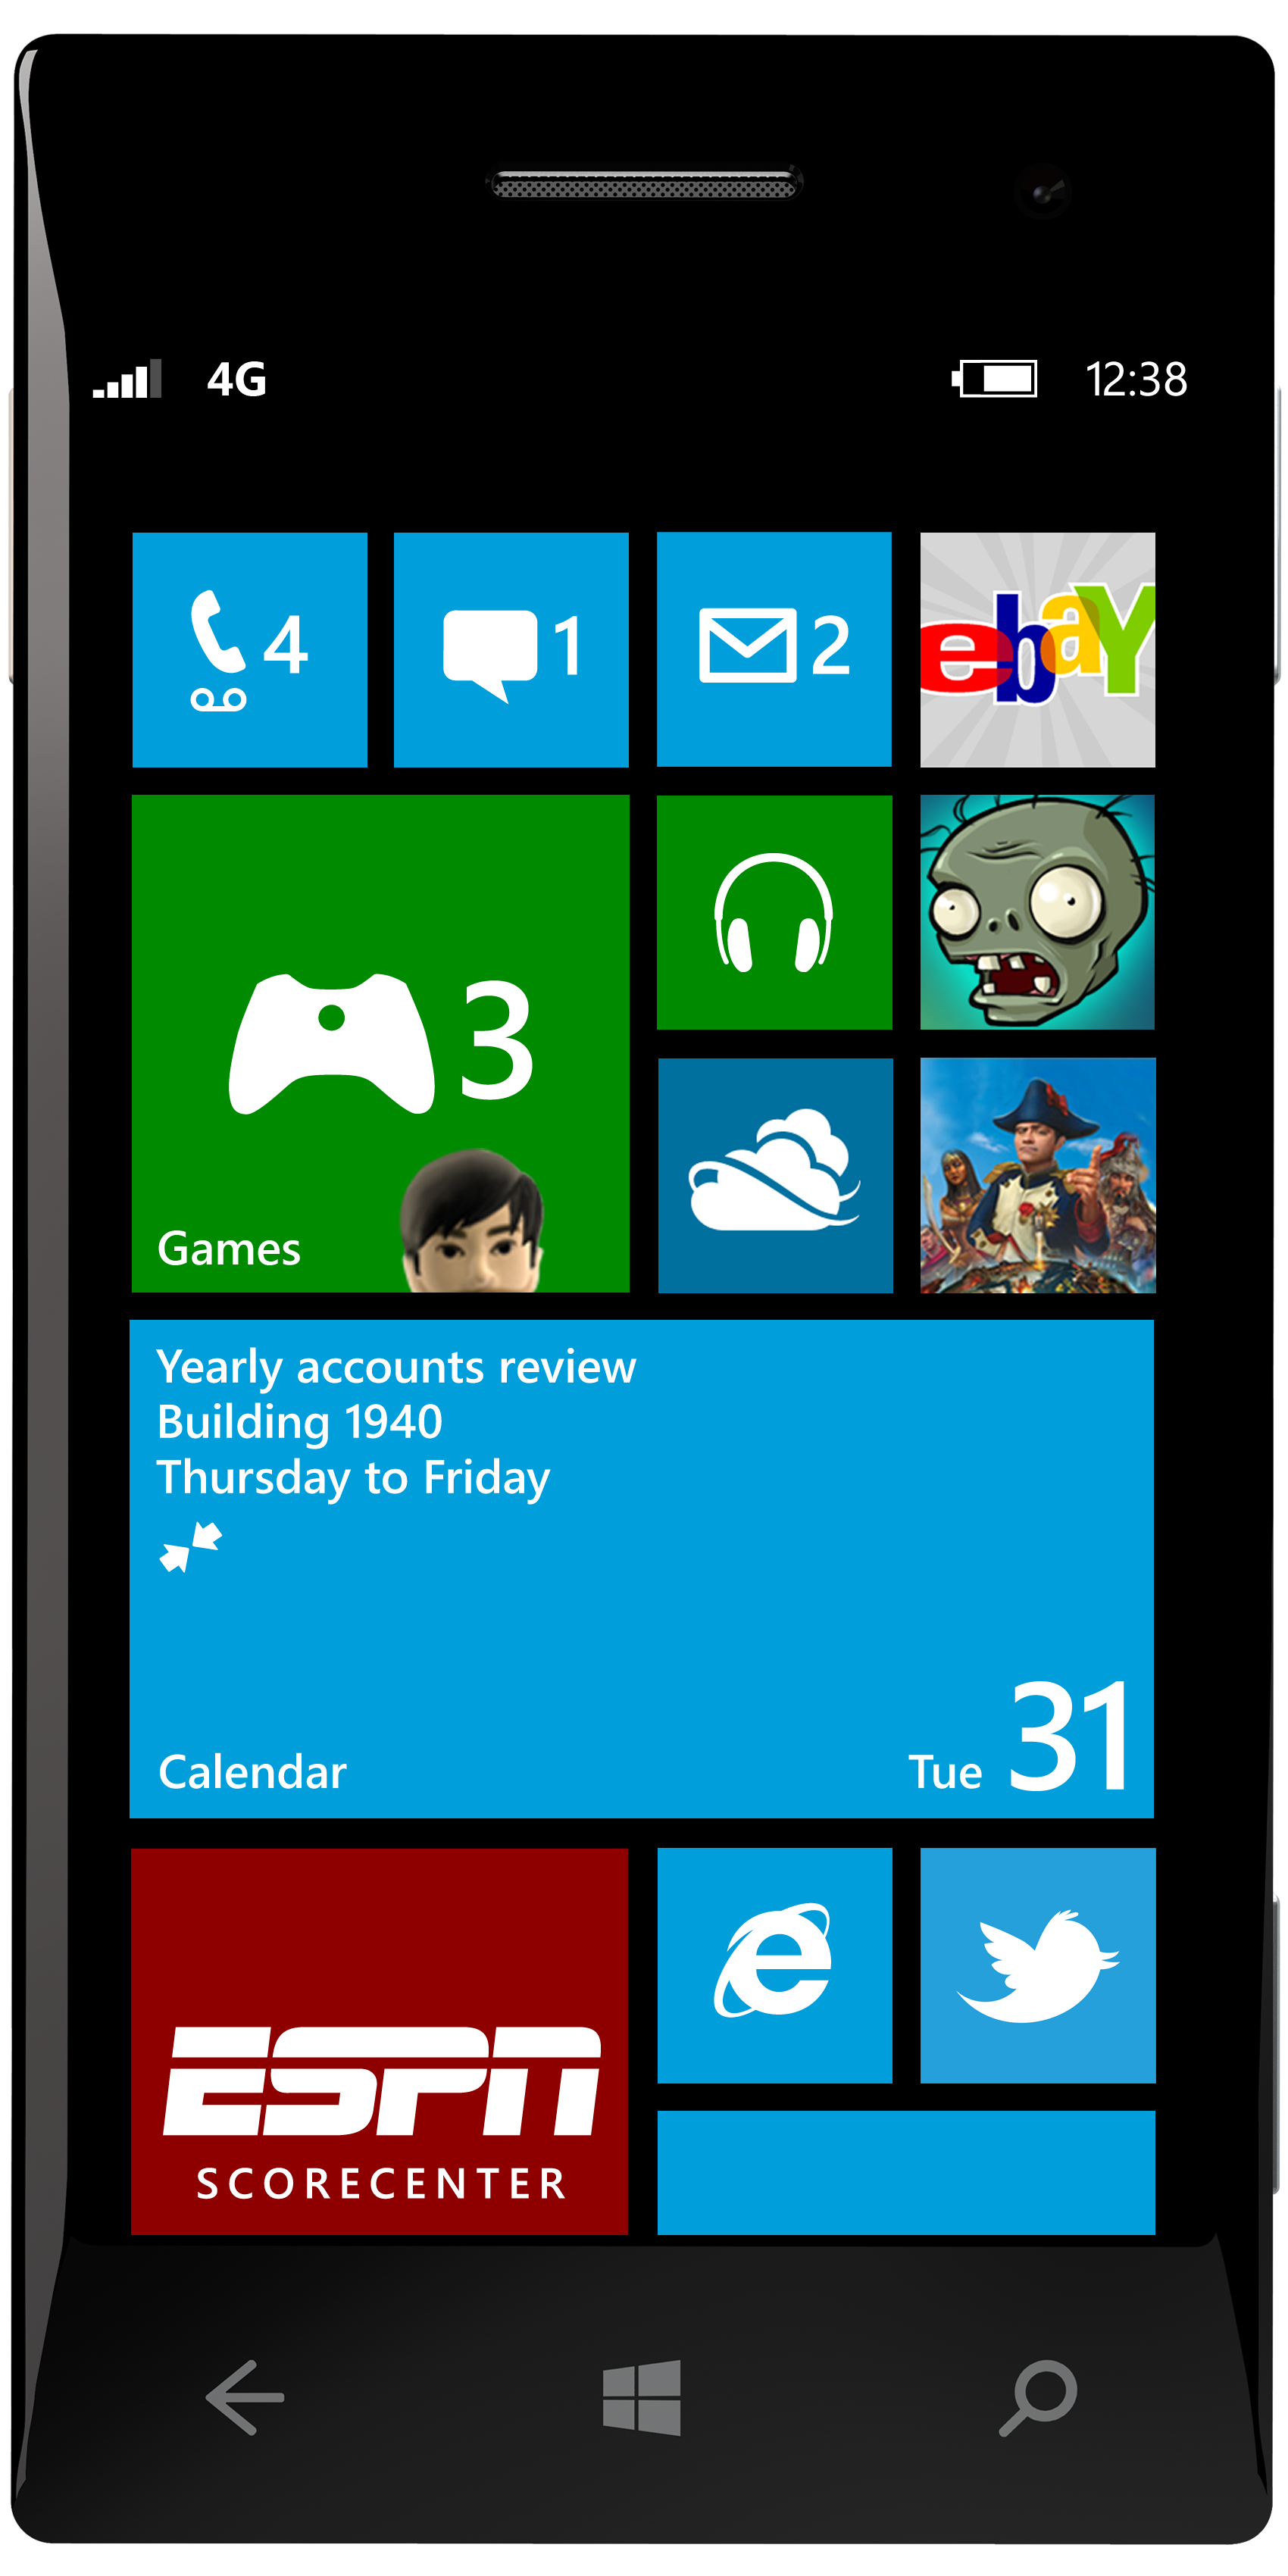 Windows Phone 8 start screen gets a facelift with free-moving, resizable tiles